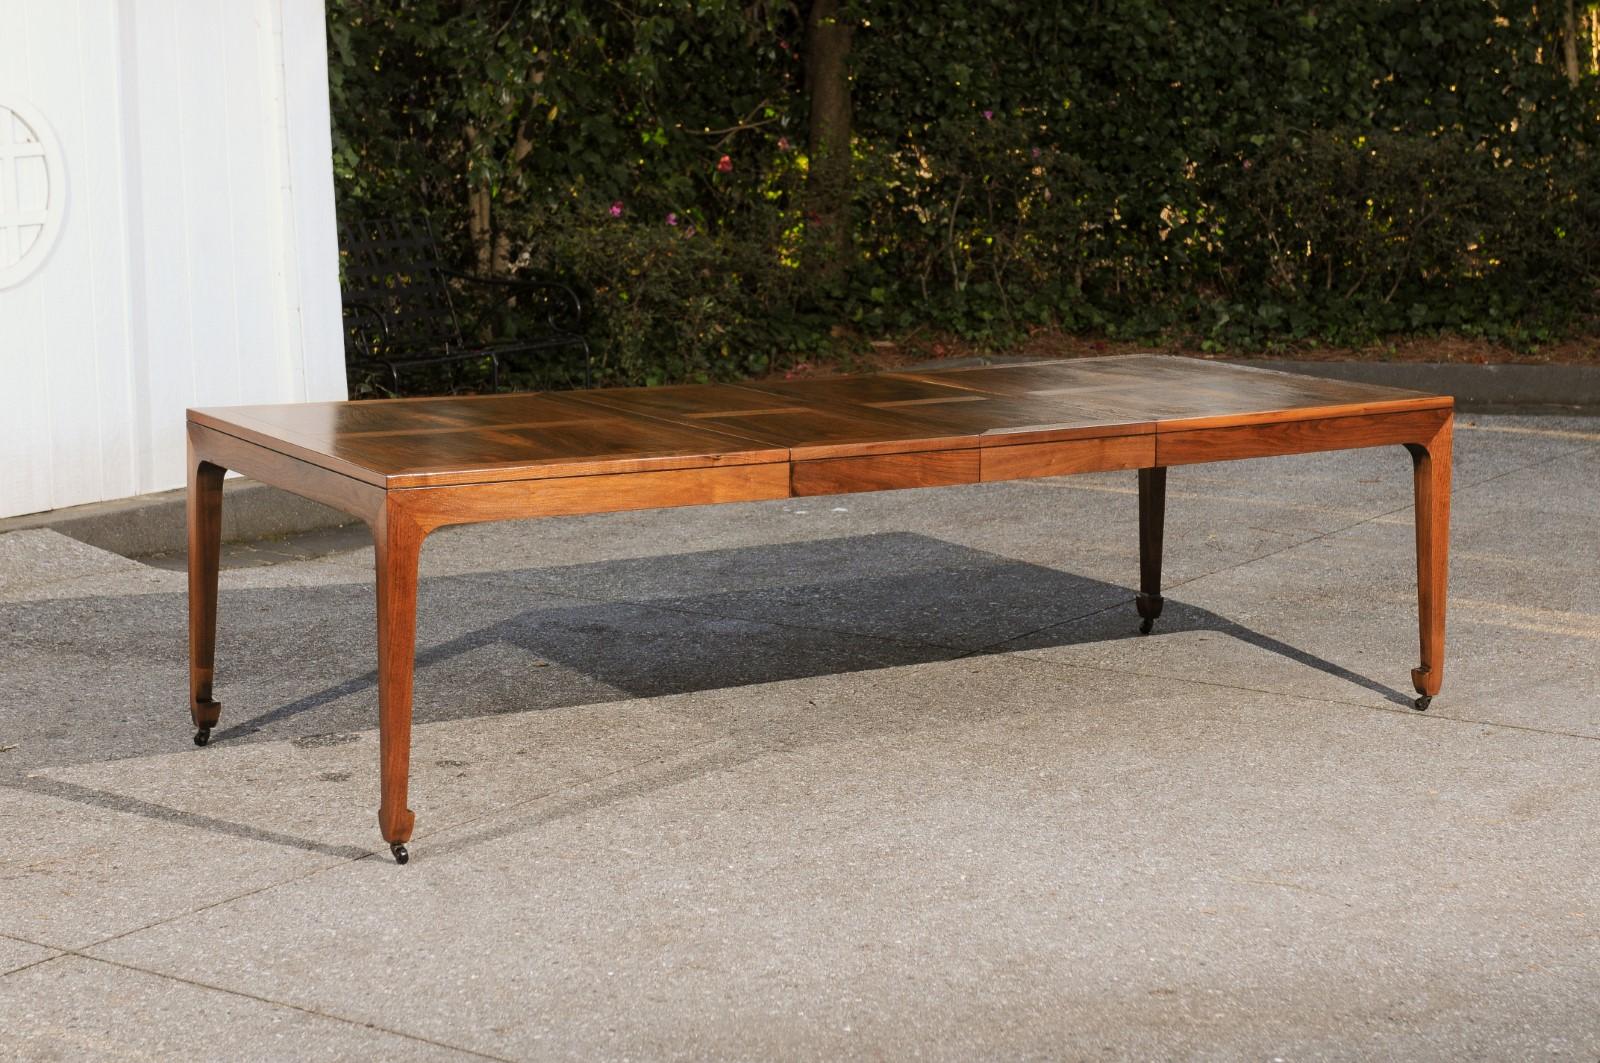 This magnificent dining table is shipped as professionally photographed and described in the listing narrative: Meticulously professionally restored and installation ready. 

A fabulous vintage extension dining table in solid walnut by Baker